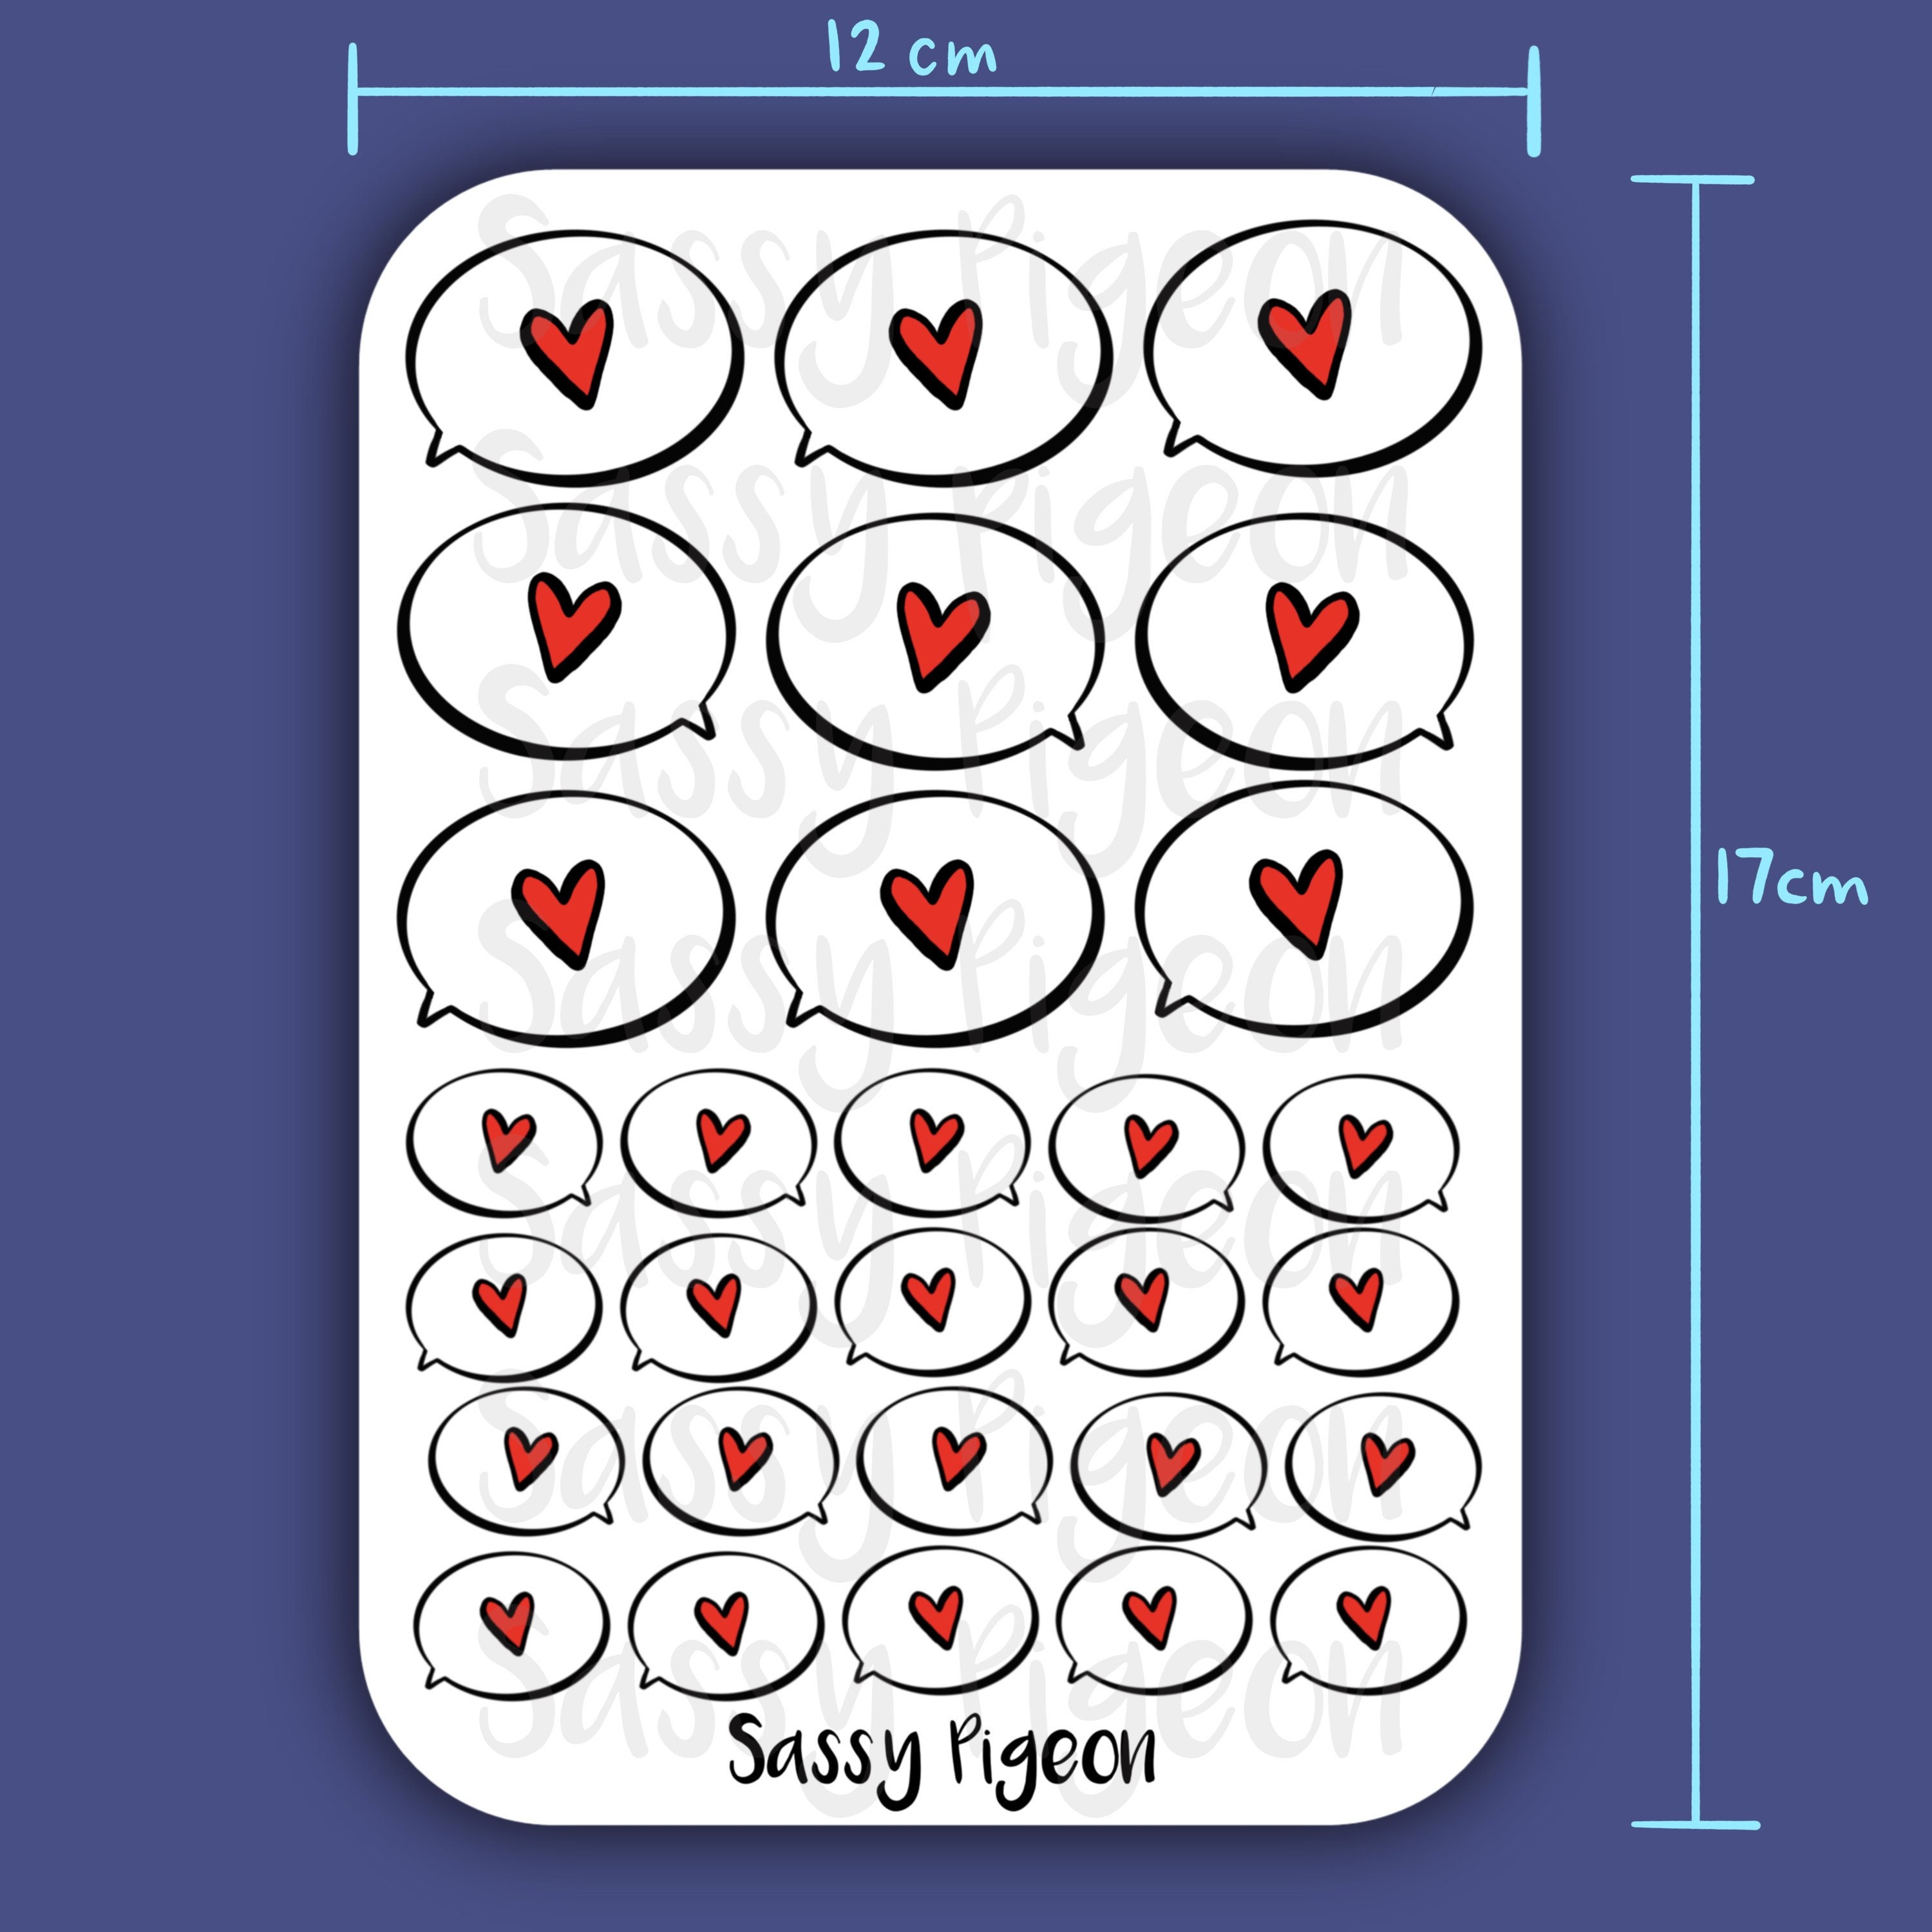 SPEECH BUBBLE Stickers perfect for your Planner, Journal, or Scrapbook